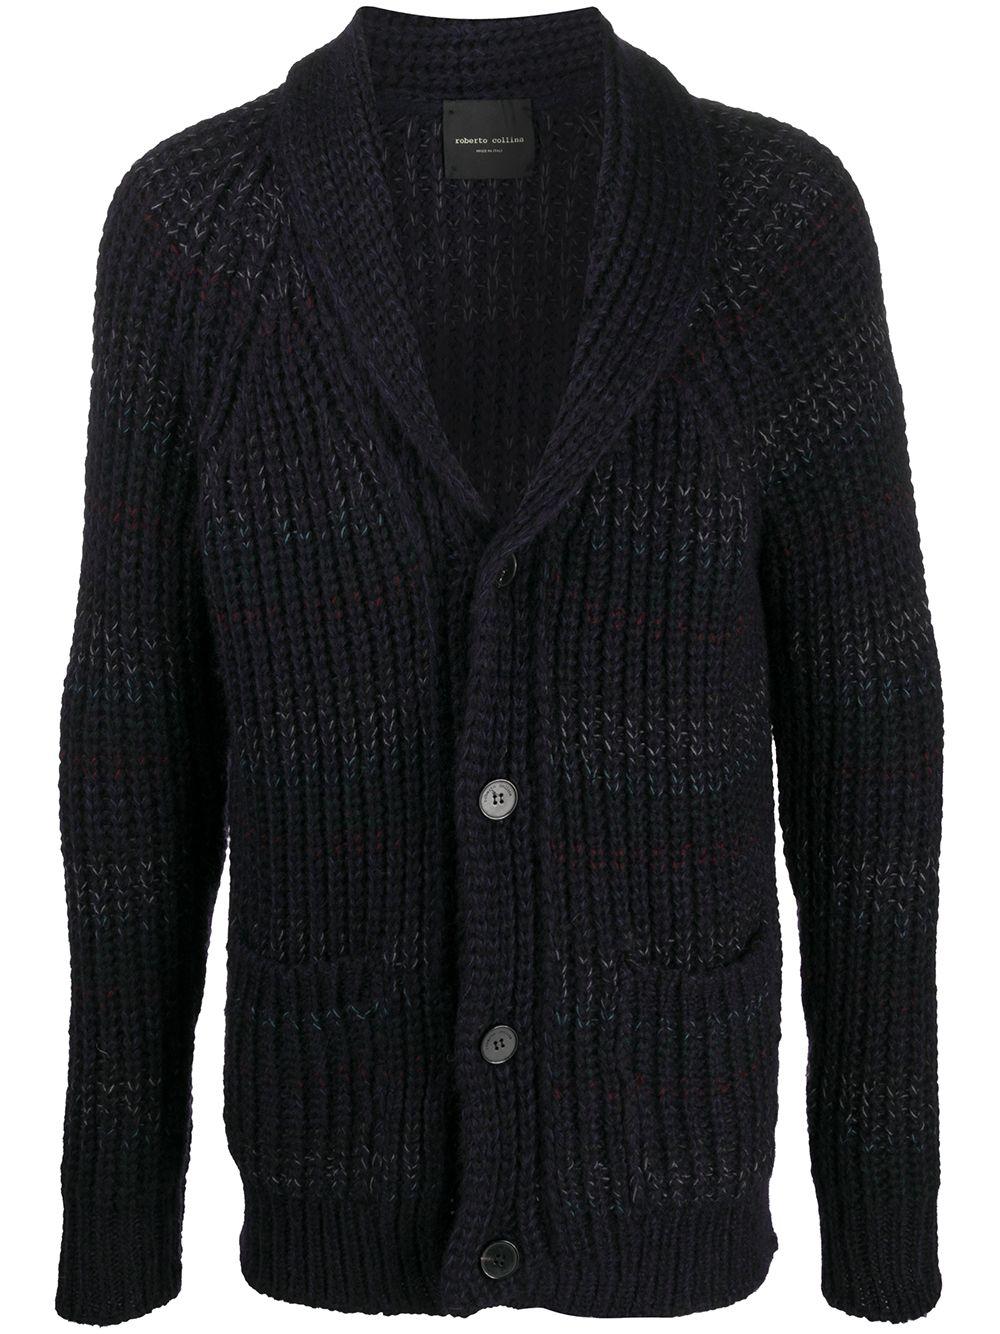 Roberto Collina Wool Striped Chunky Knitted Cardigan in Blue for Men - Lyst